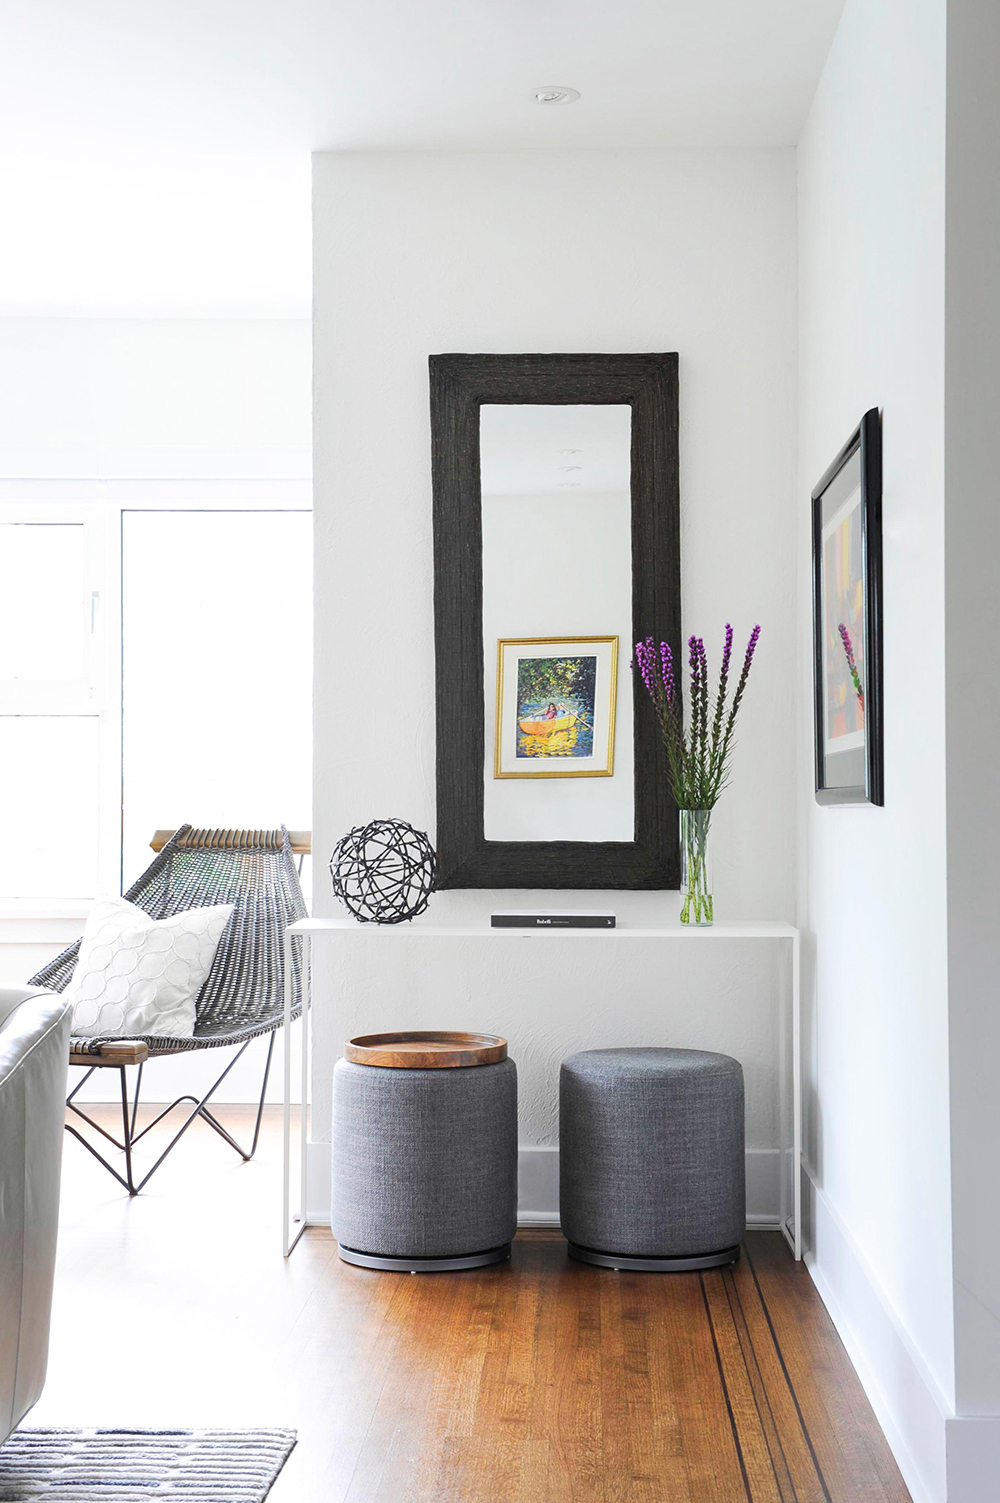 An awkward living room corner transforms into a functional nook.